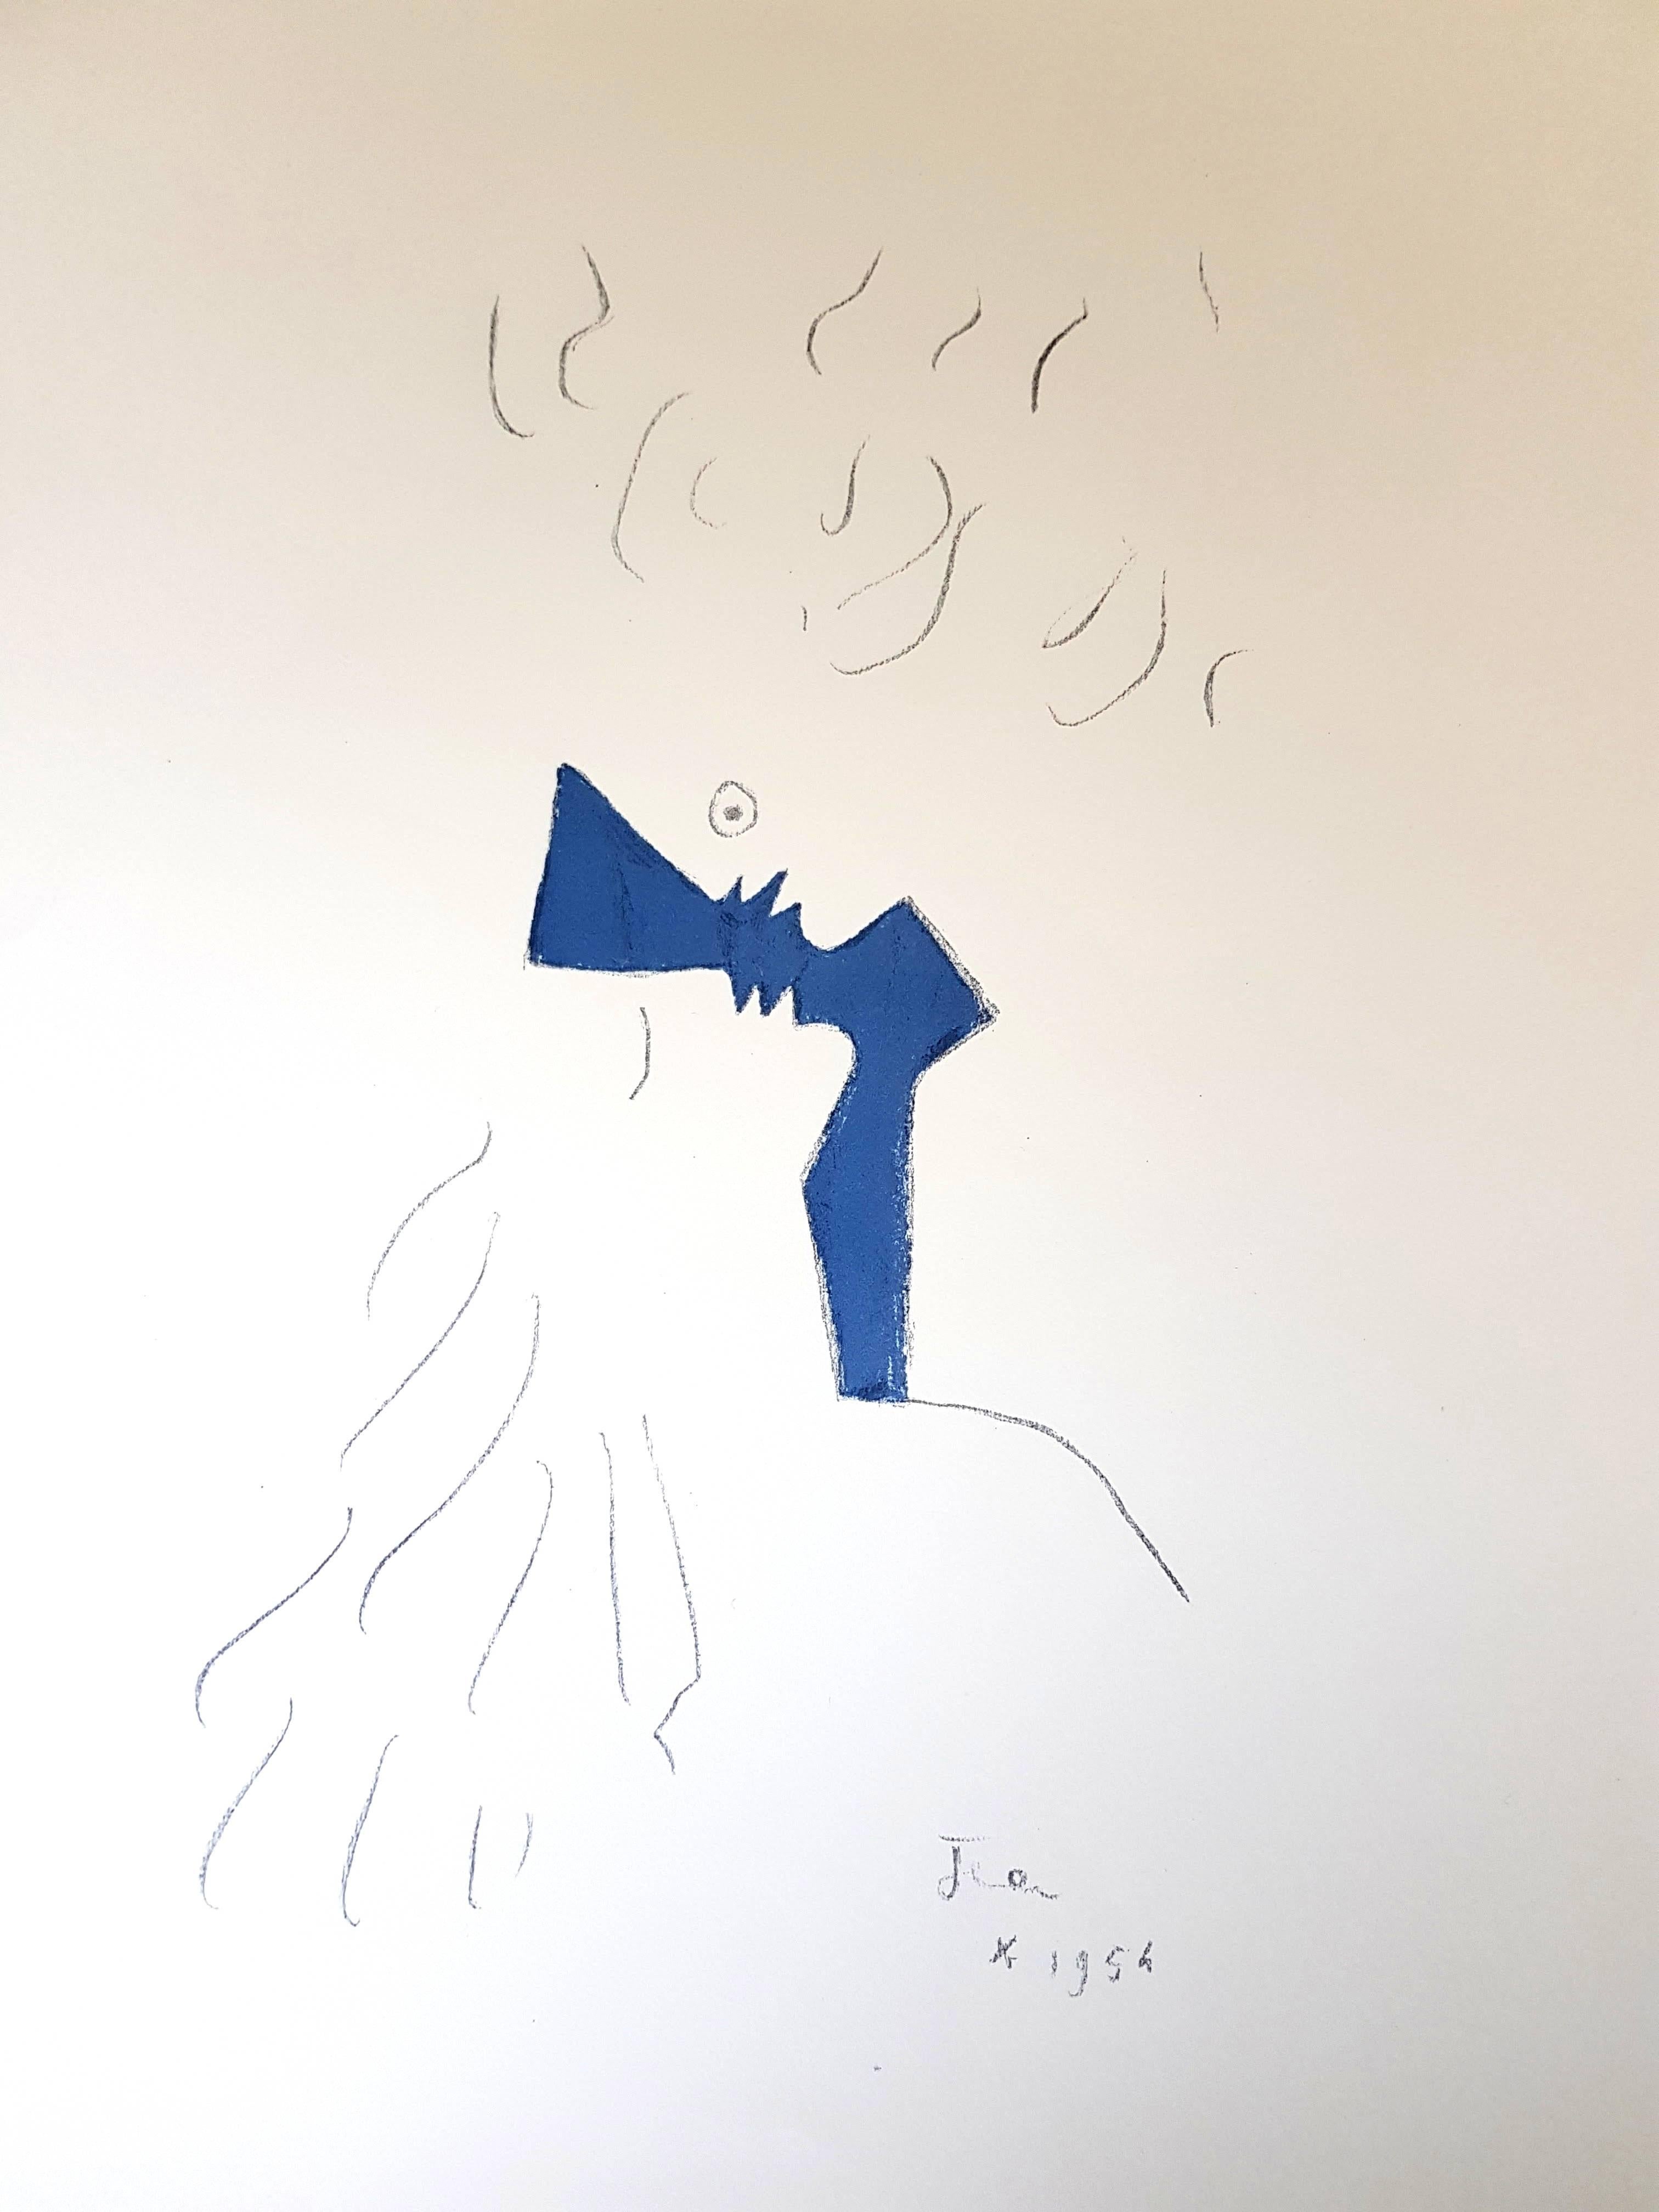 Jean Cocteau - Under the Fire Coat - Lovers - Original Lithograph
Signed "Jean" in the plate and dated 1954 in the plate.
Joseph Forêt Editions
Dimensions: 41 x 33 cm
Vellum paper.

Jean Cocteau

Writer, artist and film director Jean Cocteau was one